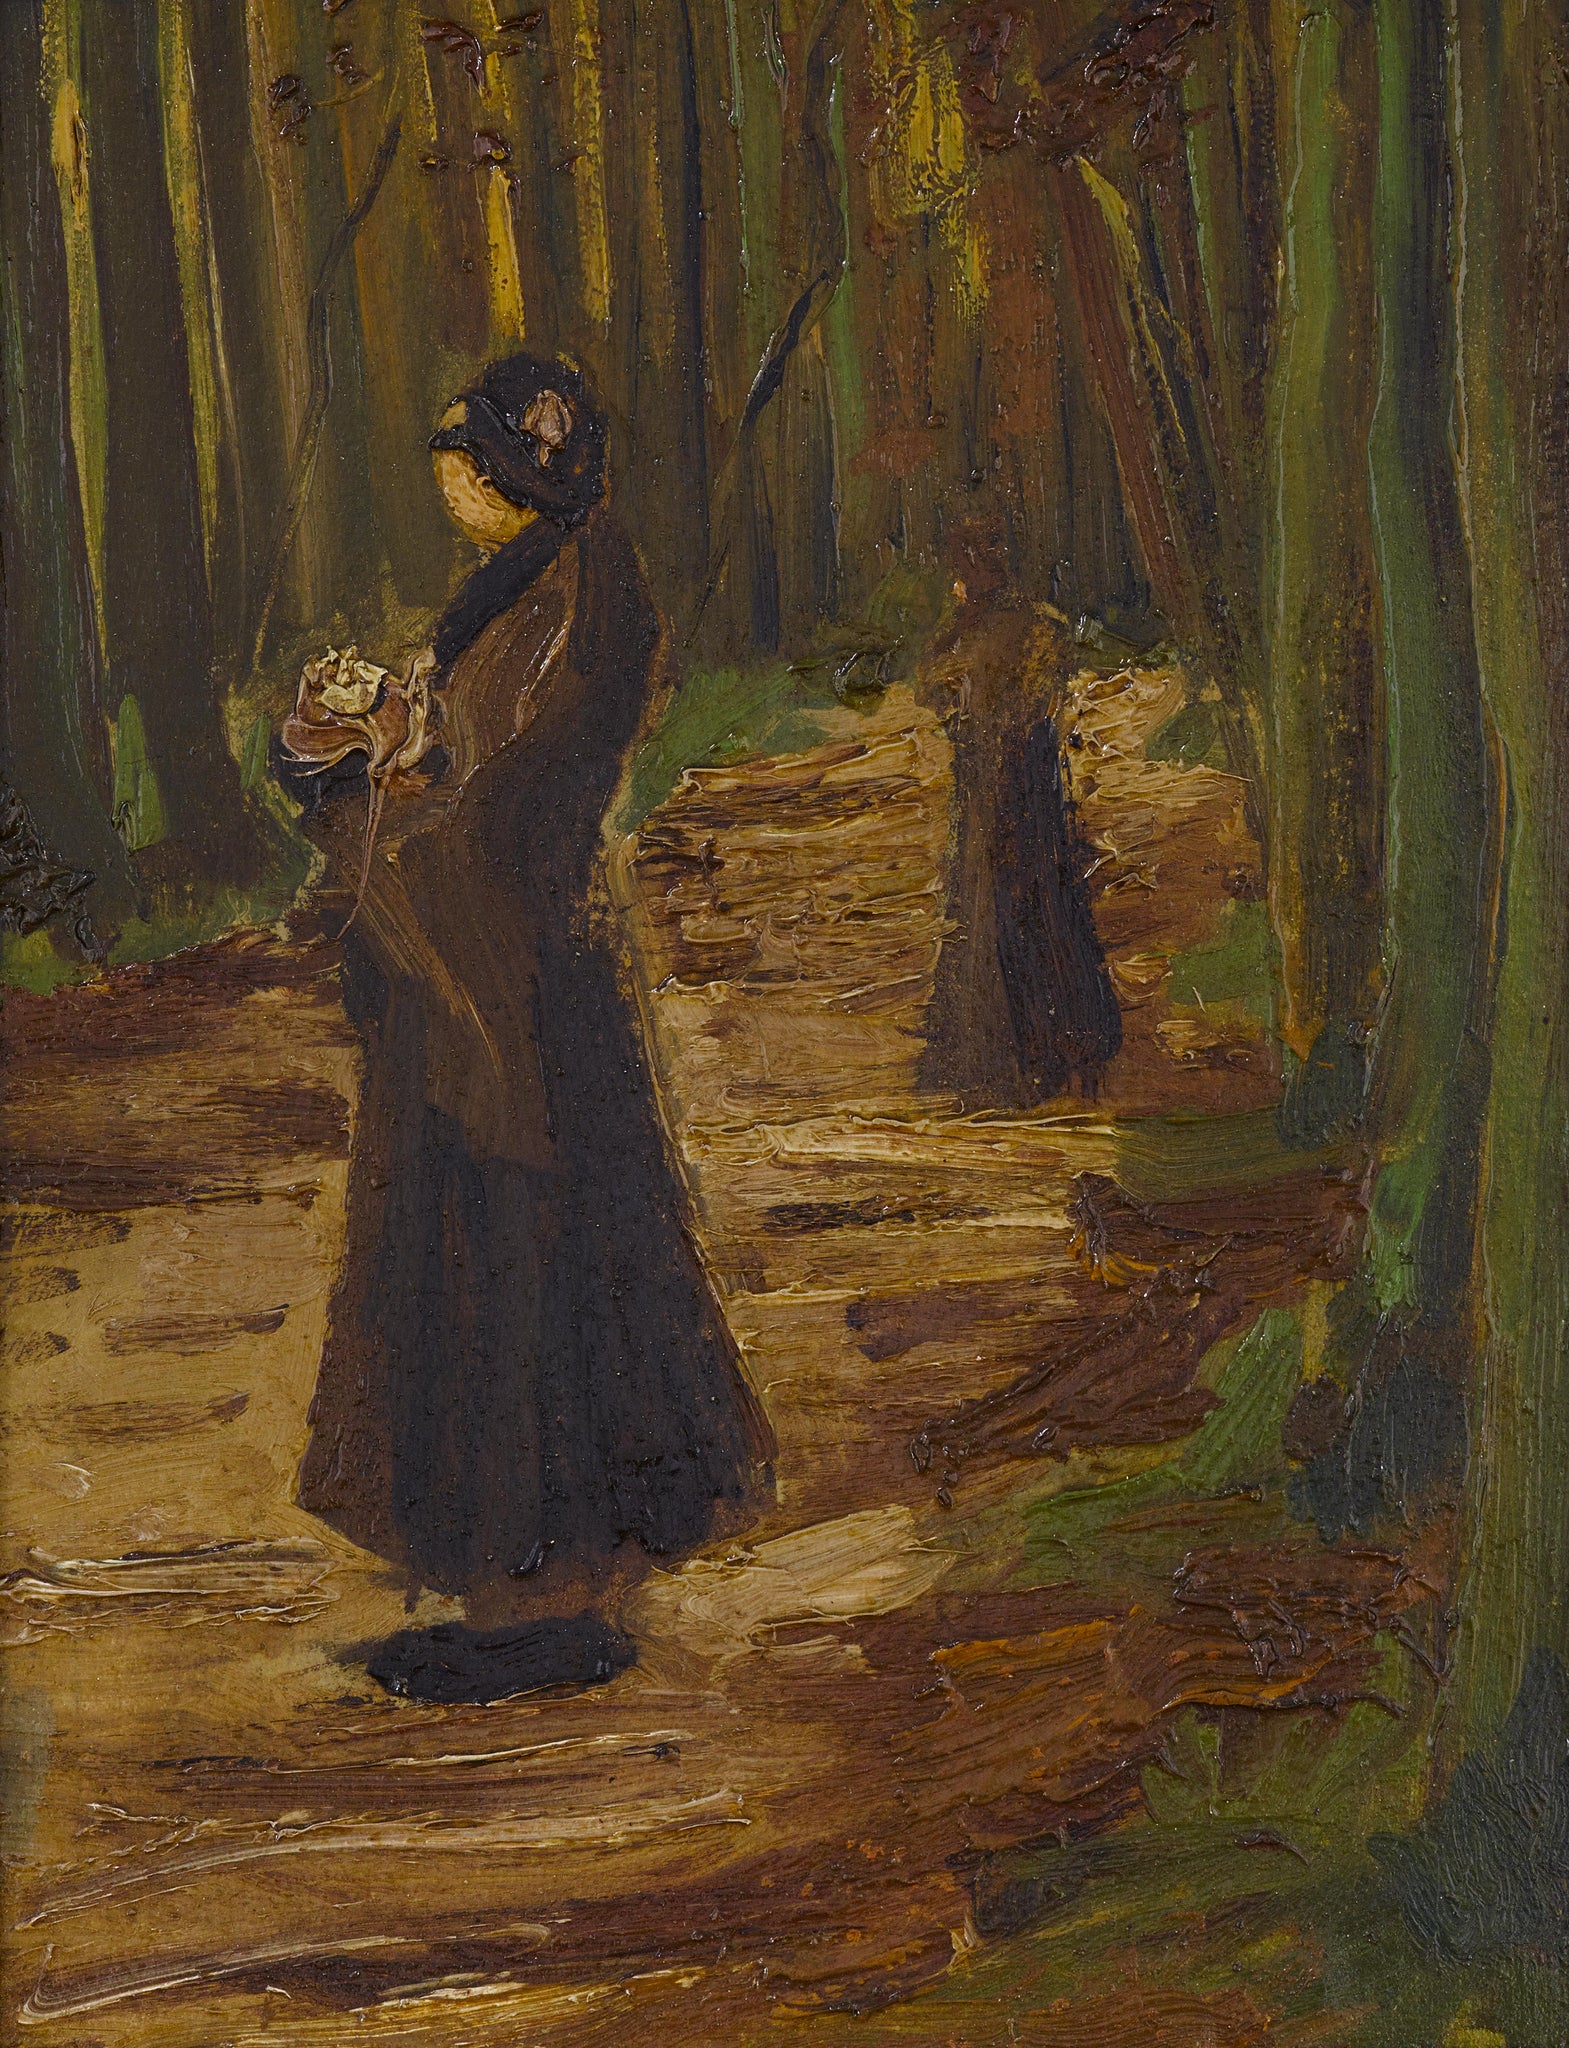 Two Women in the Woods (1882) by Vincent van Gogh - 17" x 22" Fine Art Print